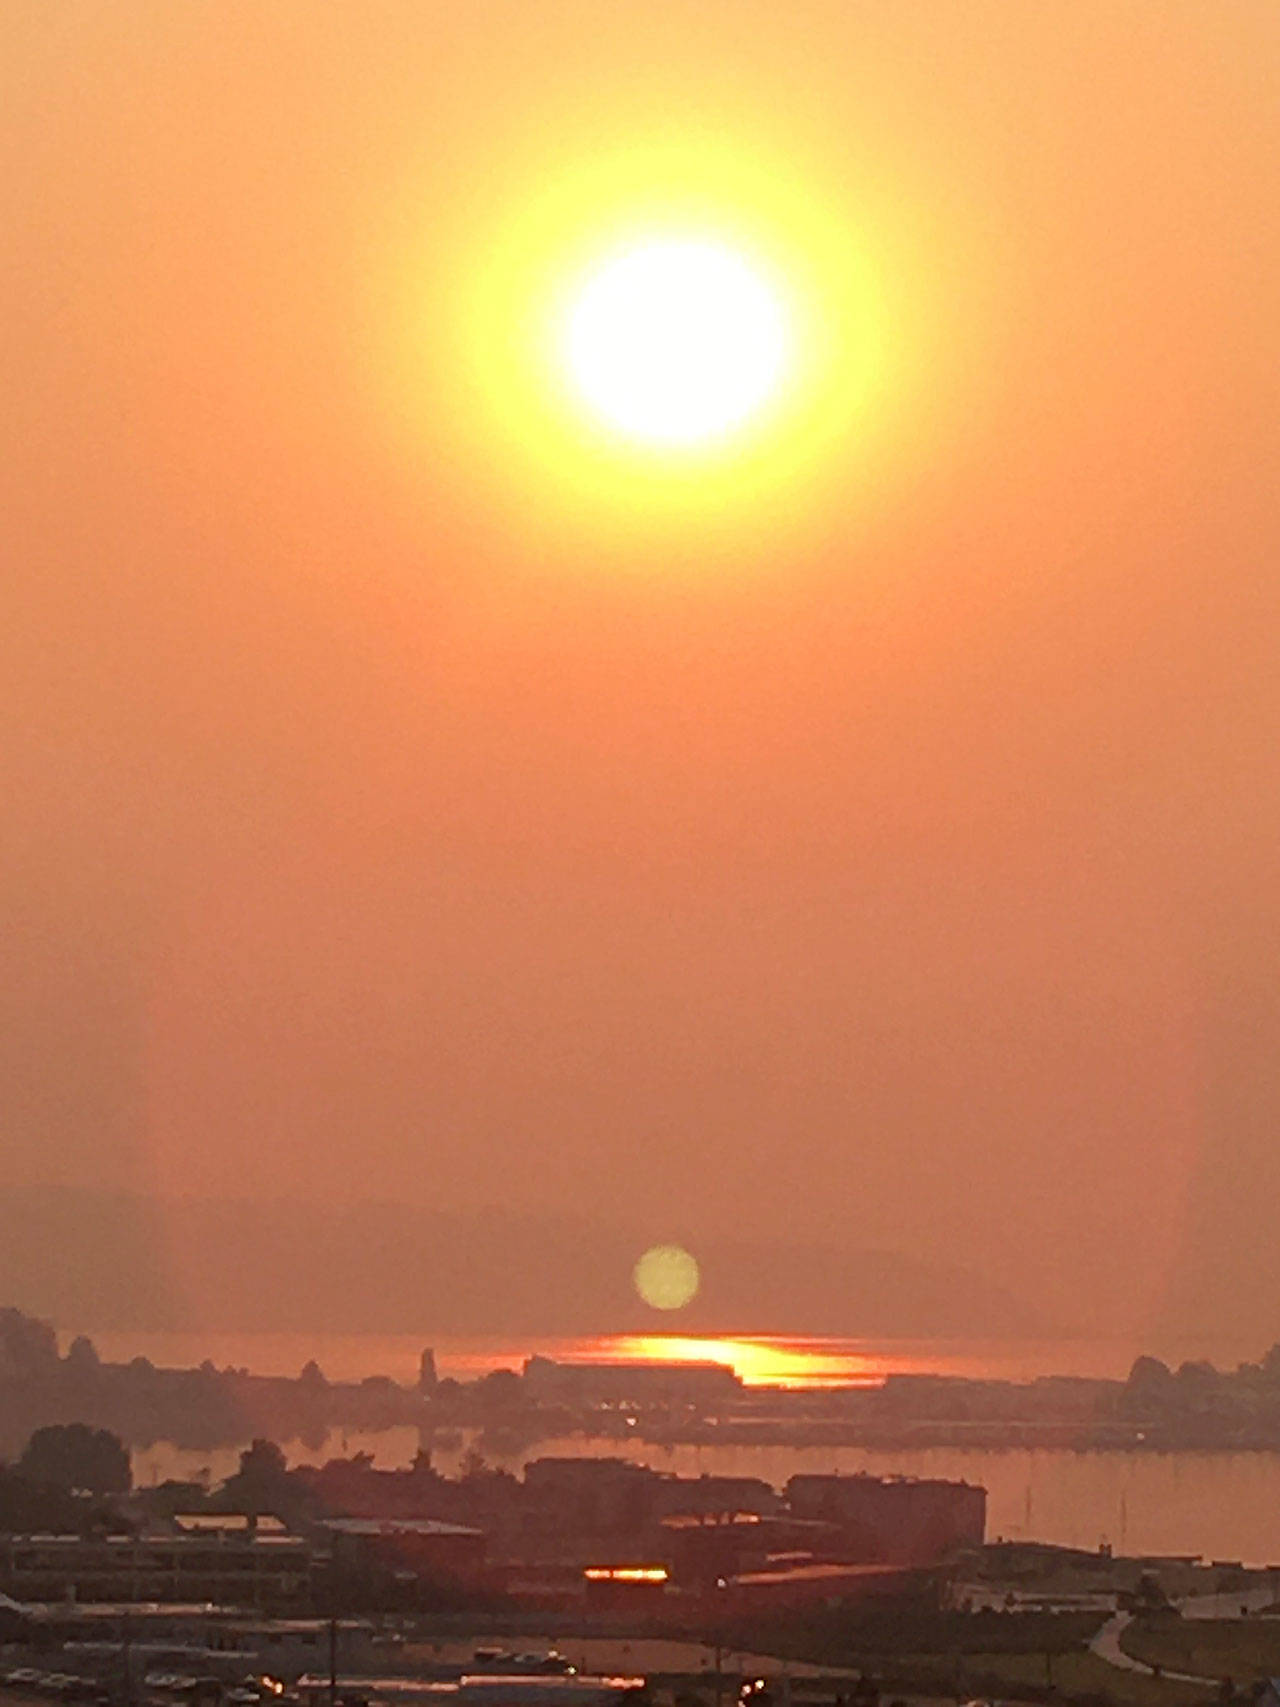 A haze caused by wildfire smoke hangs over Oak Harbor earlier this week. Photo by Jim Waller/Whidbey News-Times.